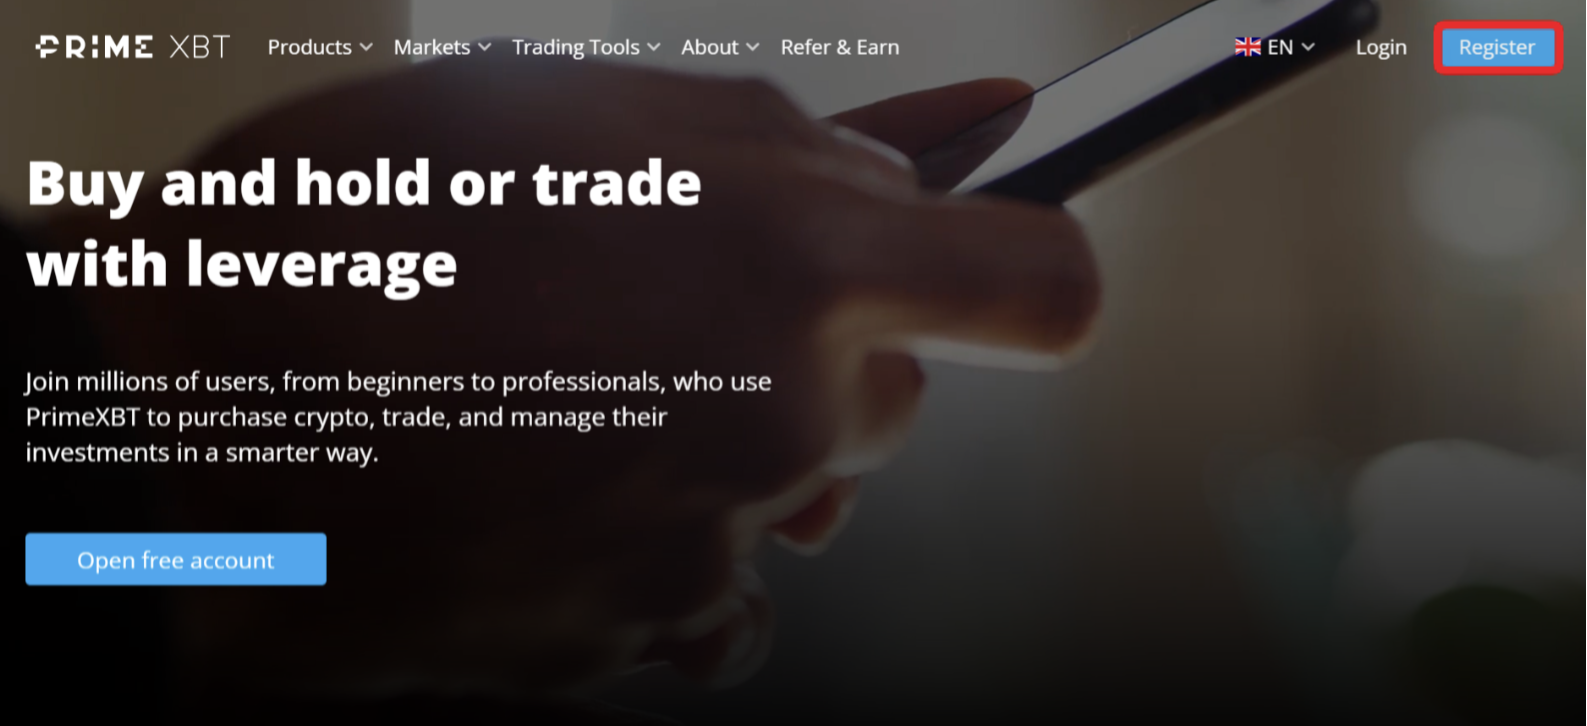 primexbt review: margin trading and leveraged trading for experienced traders